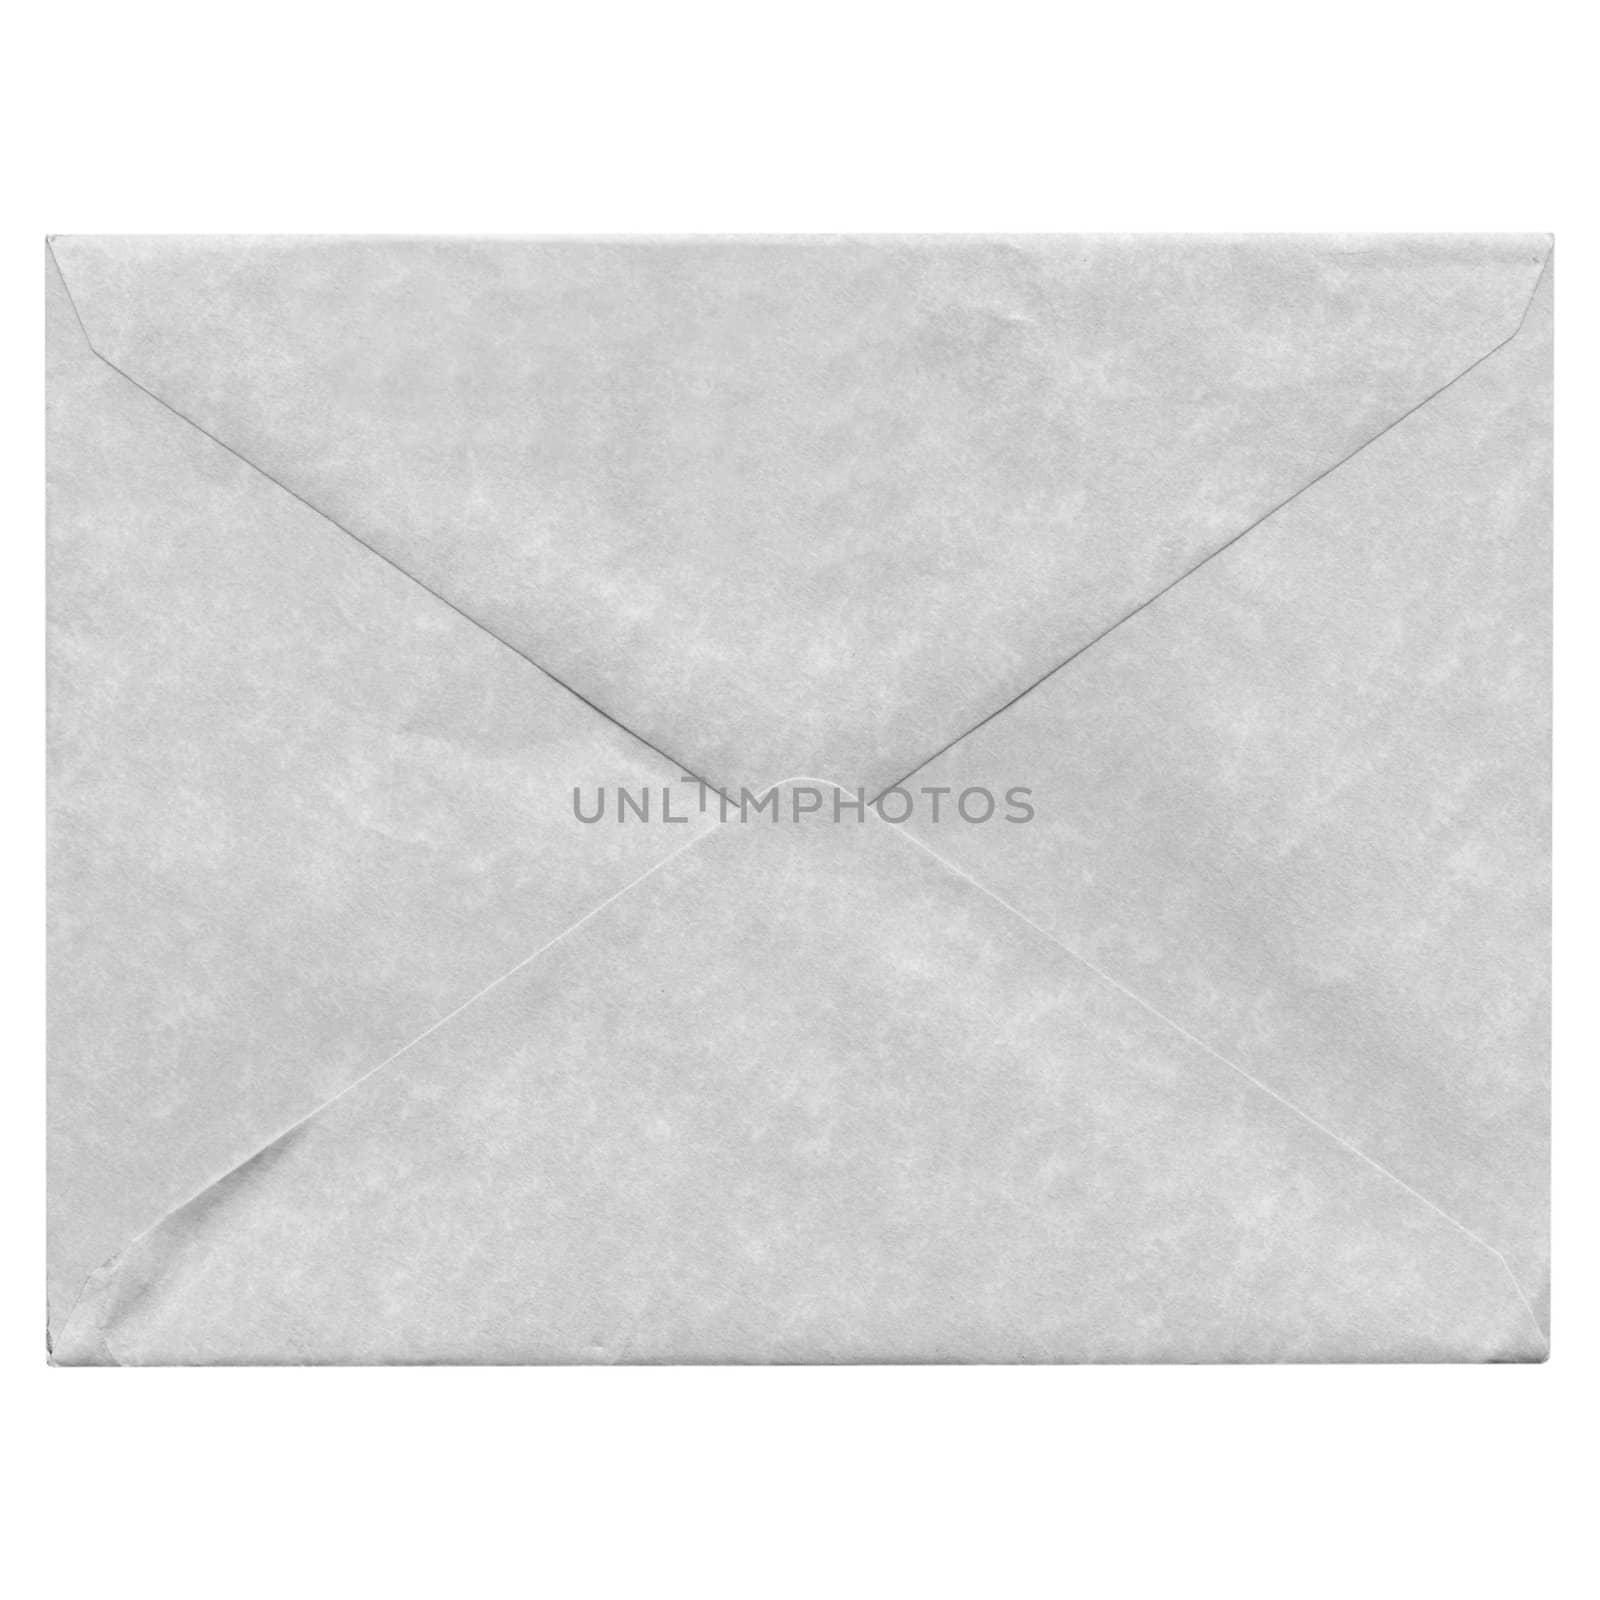 Letter or small packet envelope closed